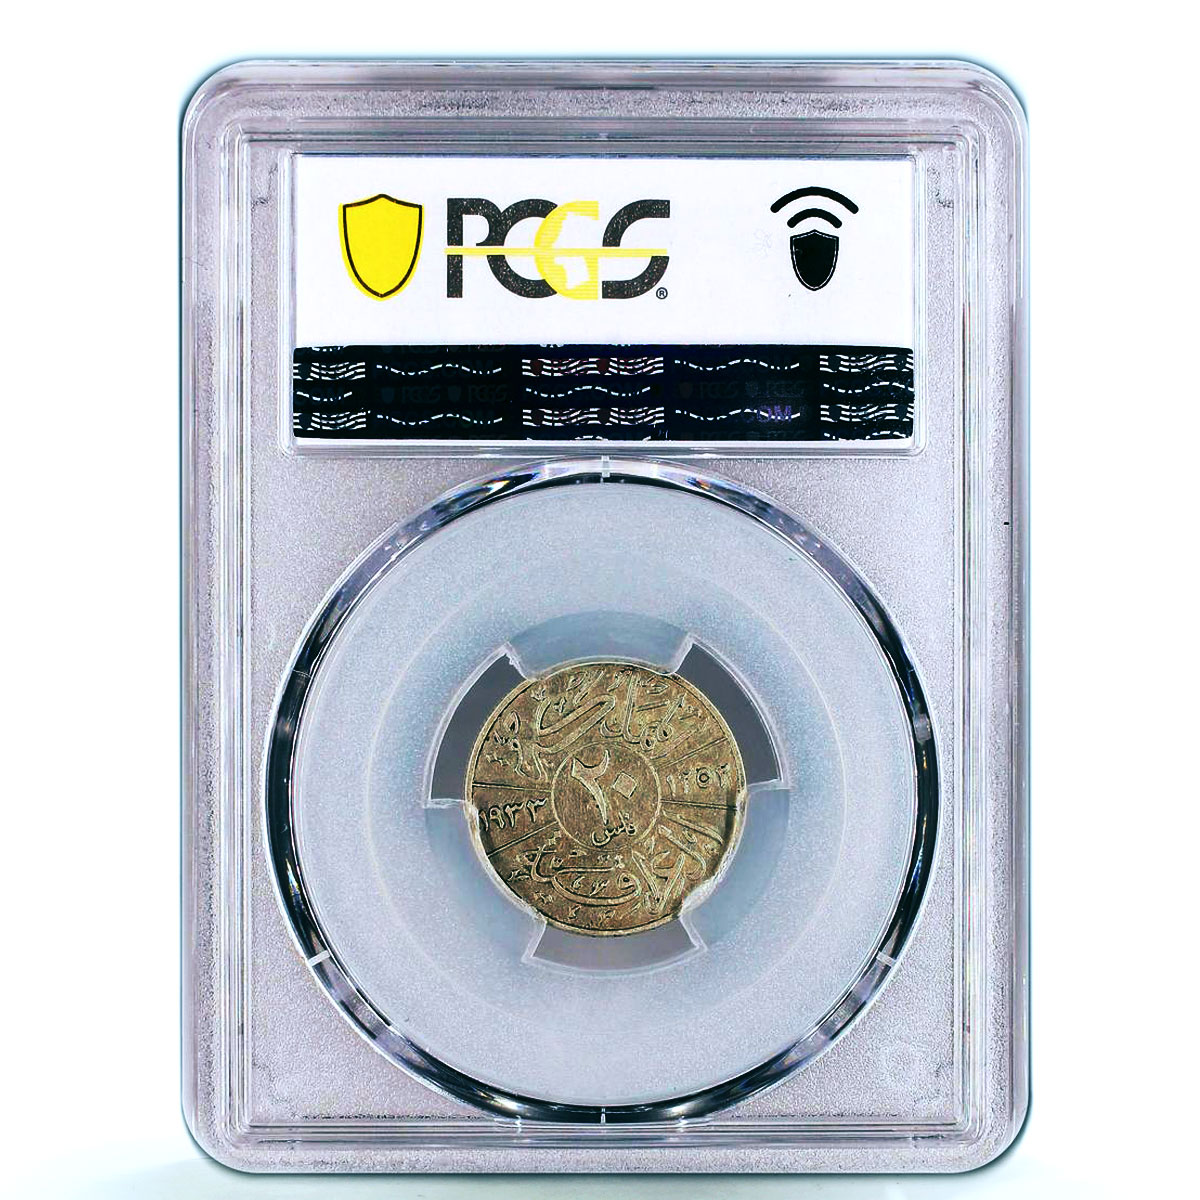 Iraq 20 fils State Coinage King Faisal Coat of Arms Error AU53 PCGS Ag coin 1933